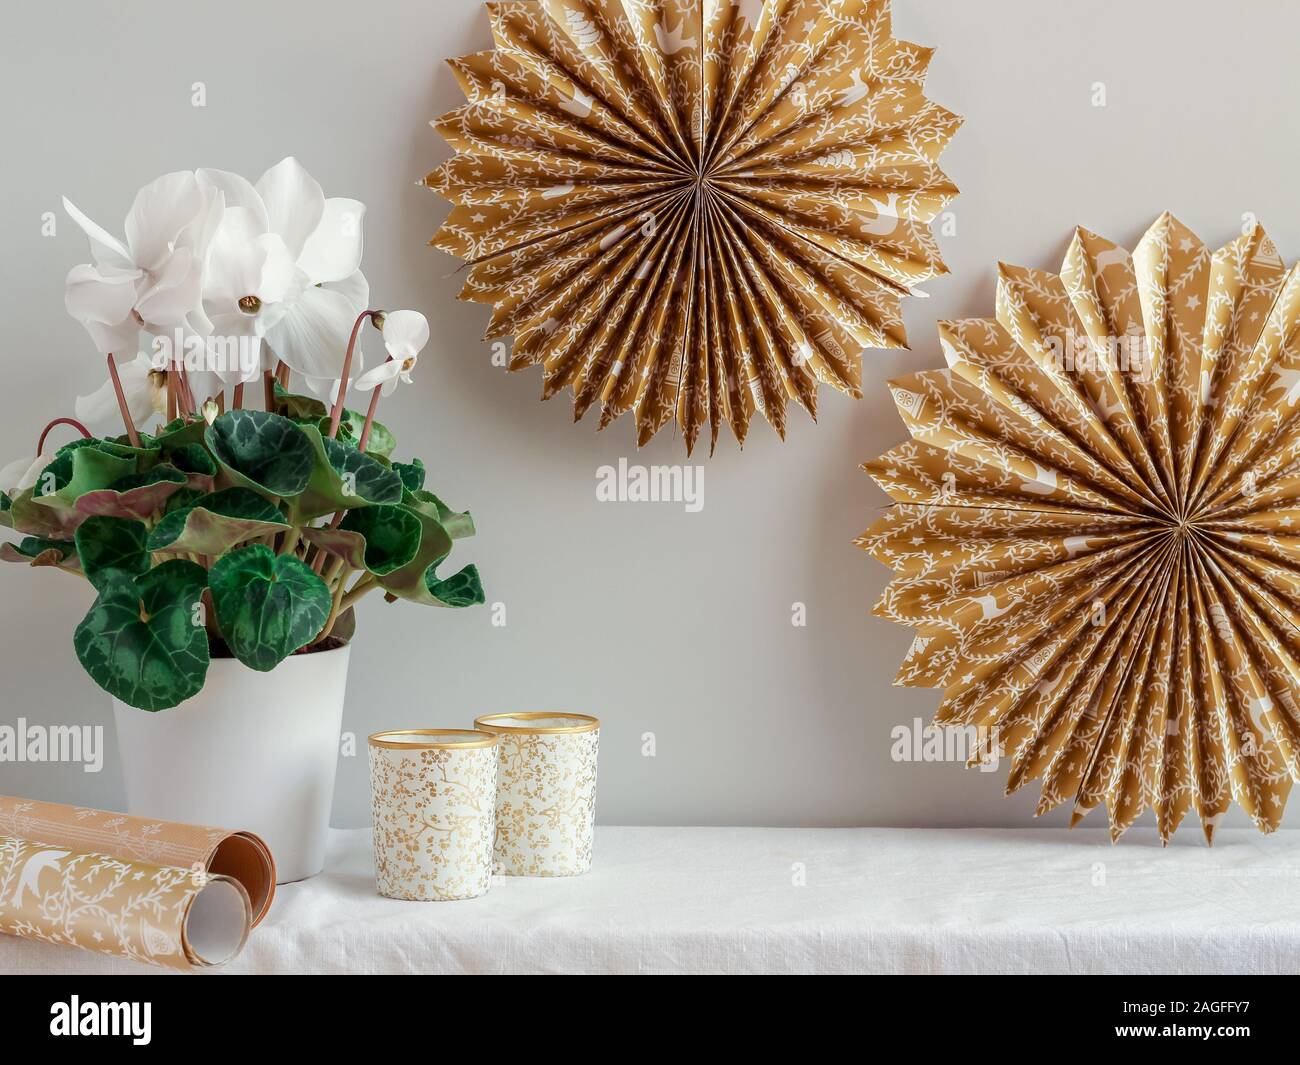 Handmade golden paper stars and candles with cyclamen flower to decorate a living room Stock Photo